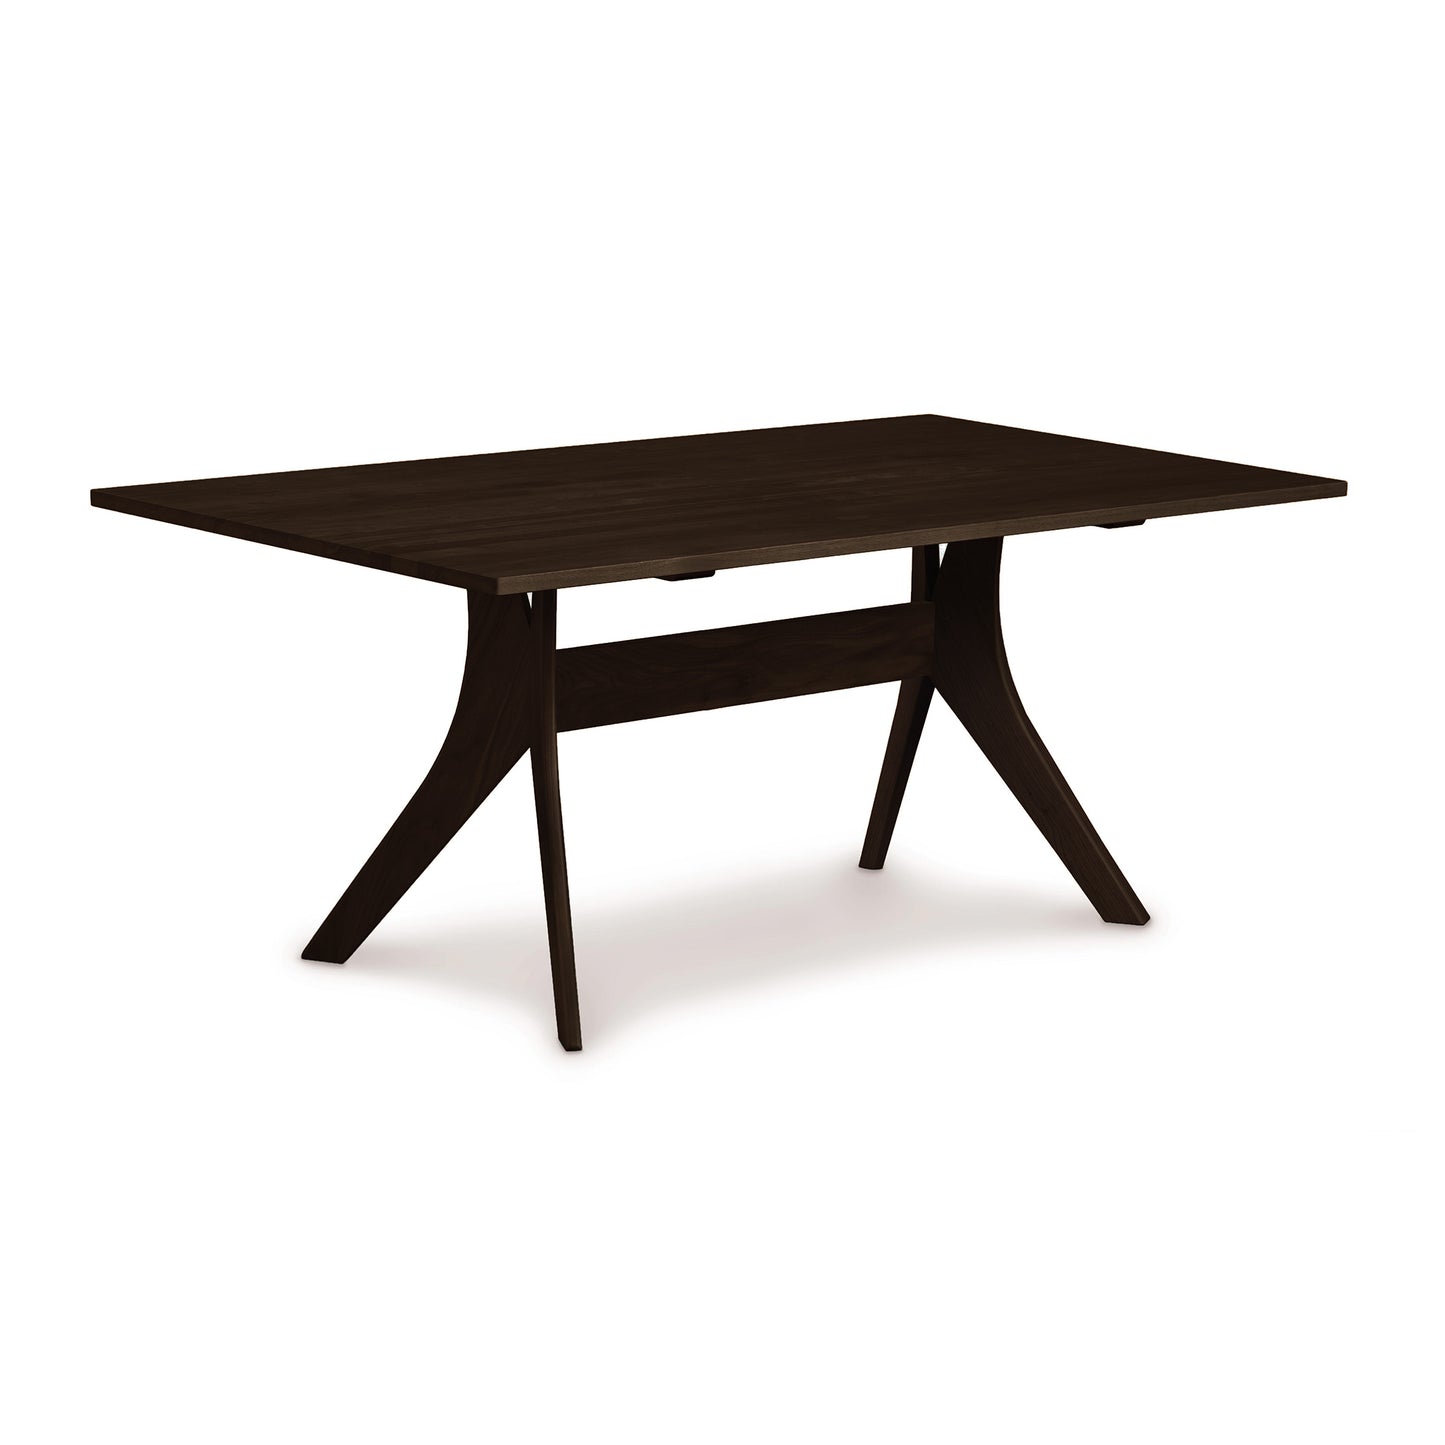 An Audrey Solid Top Dining Table by Copeland Furniture with a solid hardwood base.